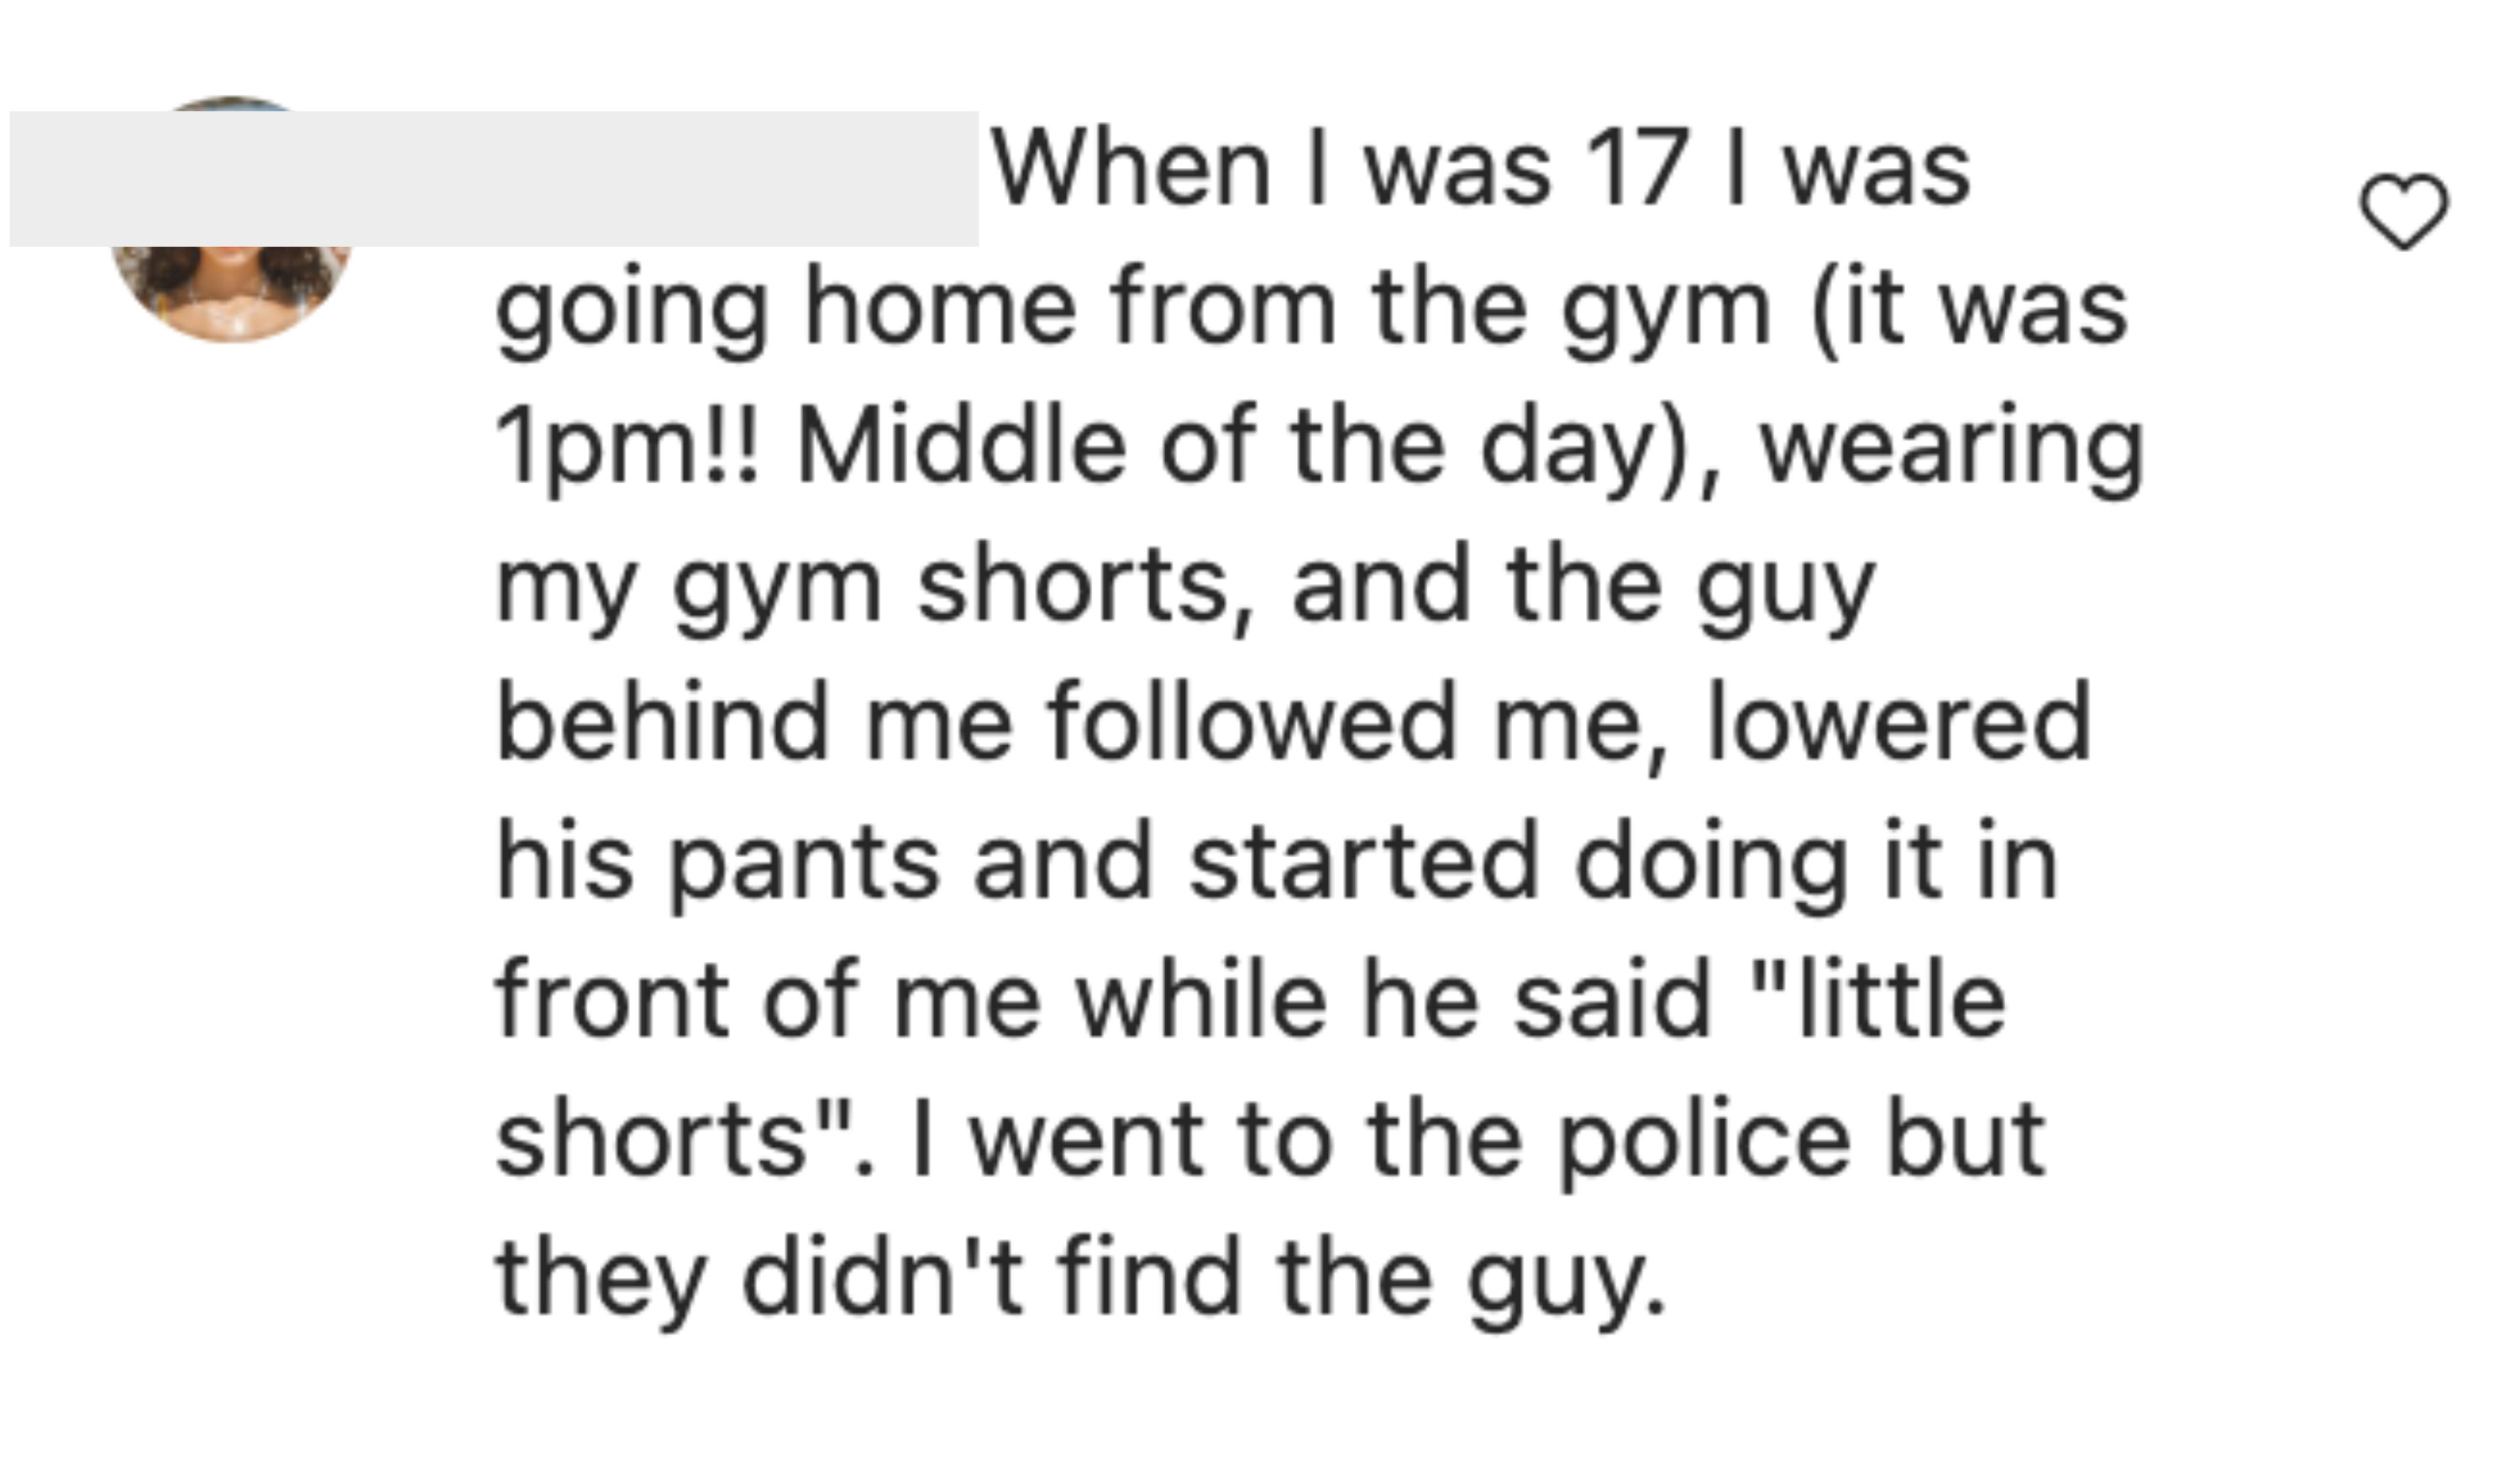 A woman says when she was 17, a man followed her and began masturbating while talking about the shorts she was wearing